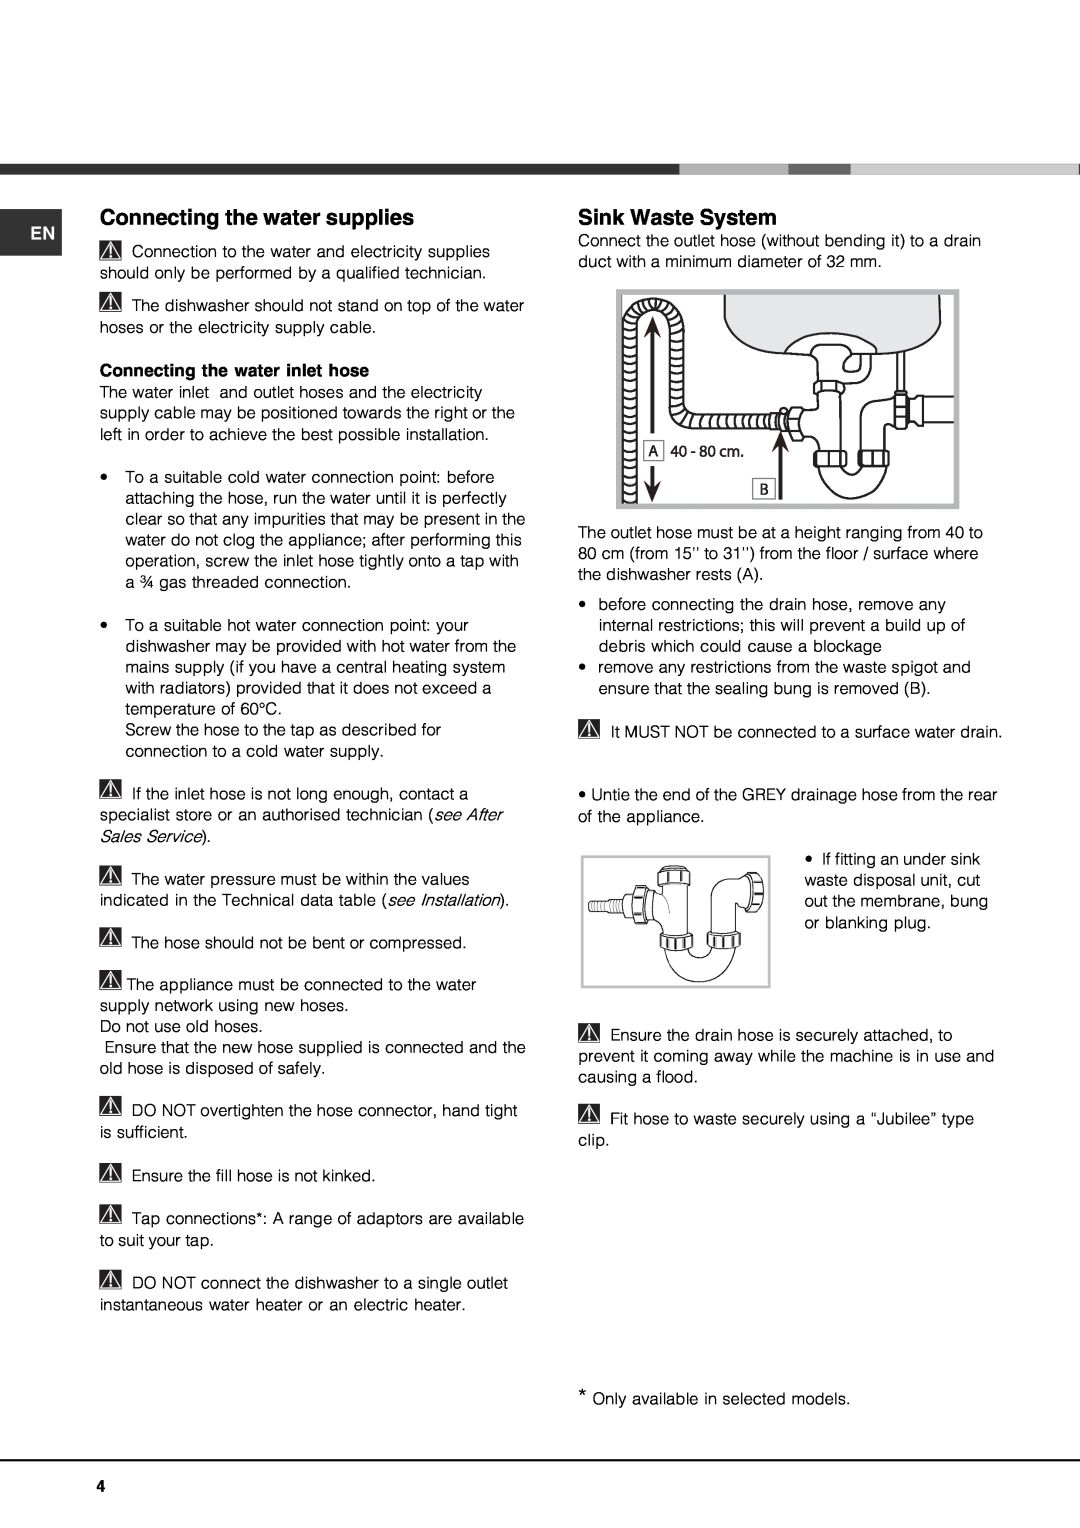 Hotpoint FDD 914 manual Connecting the water supplies, Sink Waste System, Connecting the water inlet hose 